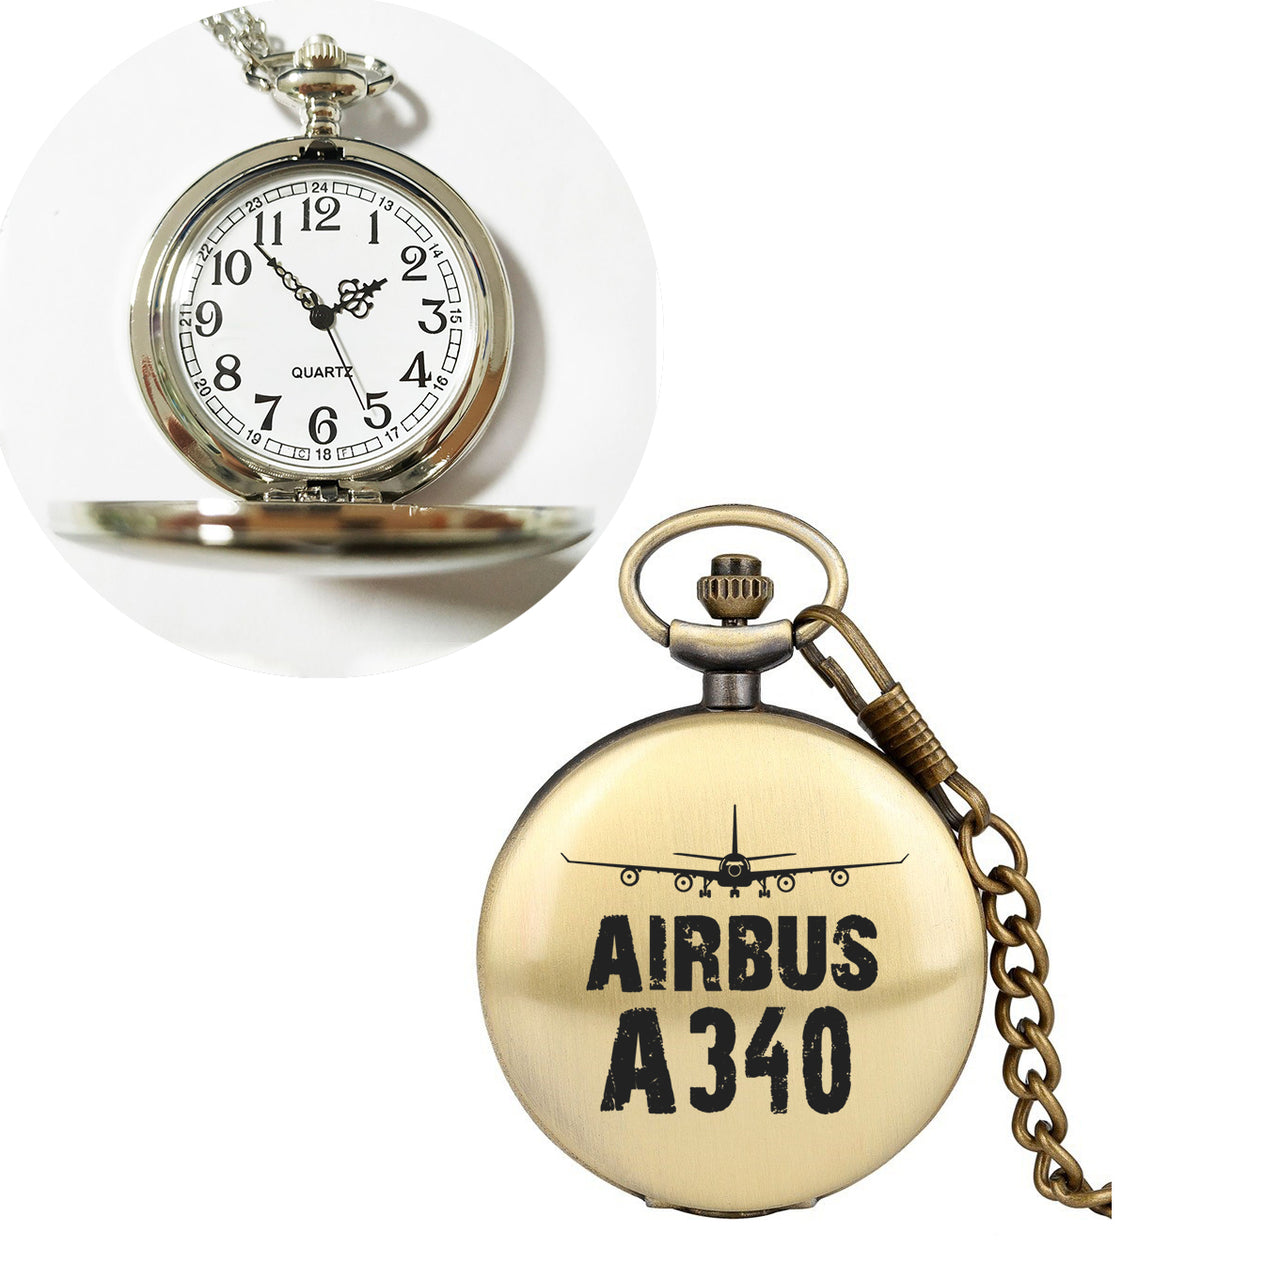 Airbus A340 & Plane Designed Pocket Watches